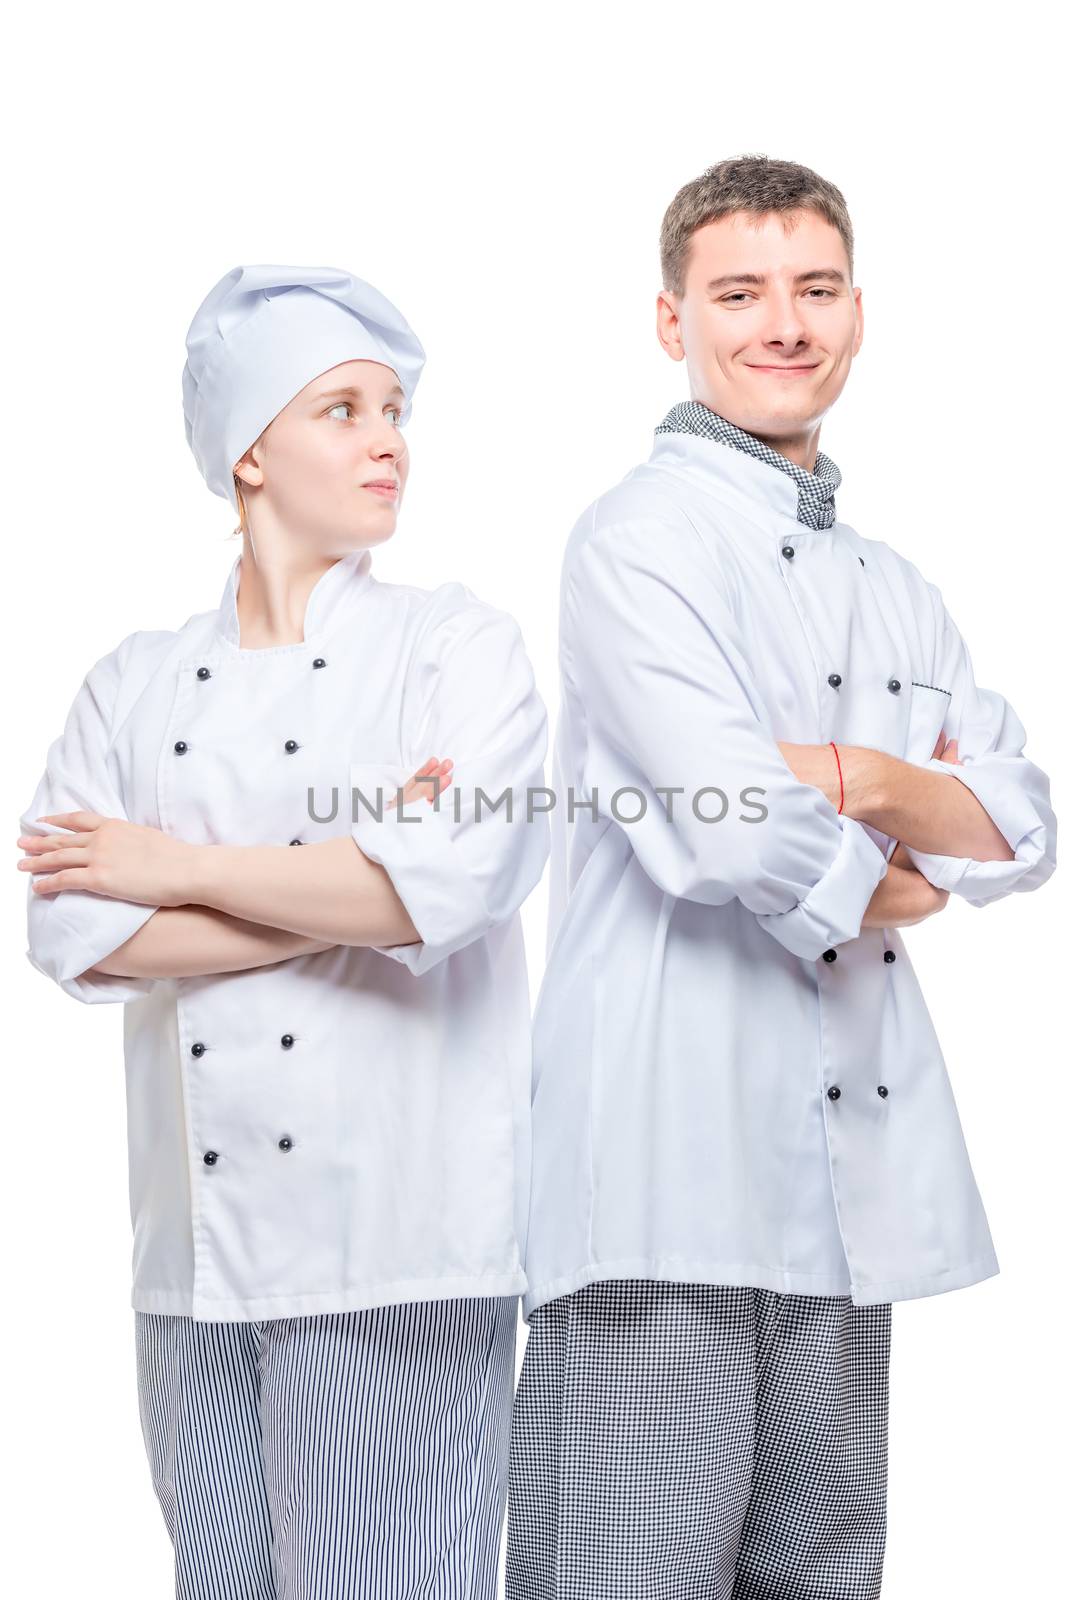 vertical portrait of a successful team of professional chefs in suits on a white background